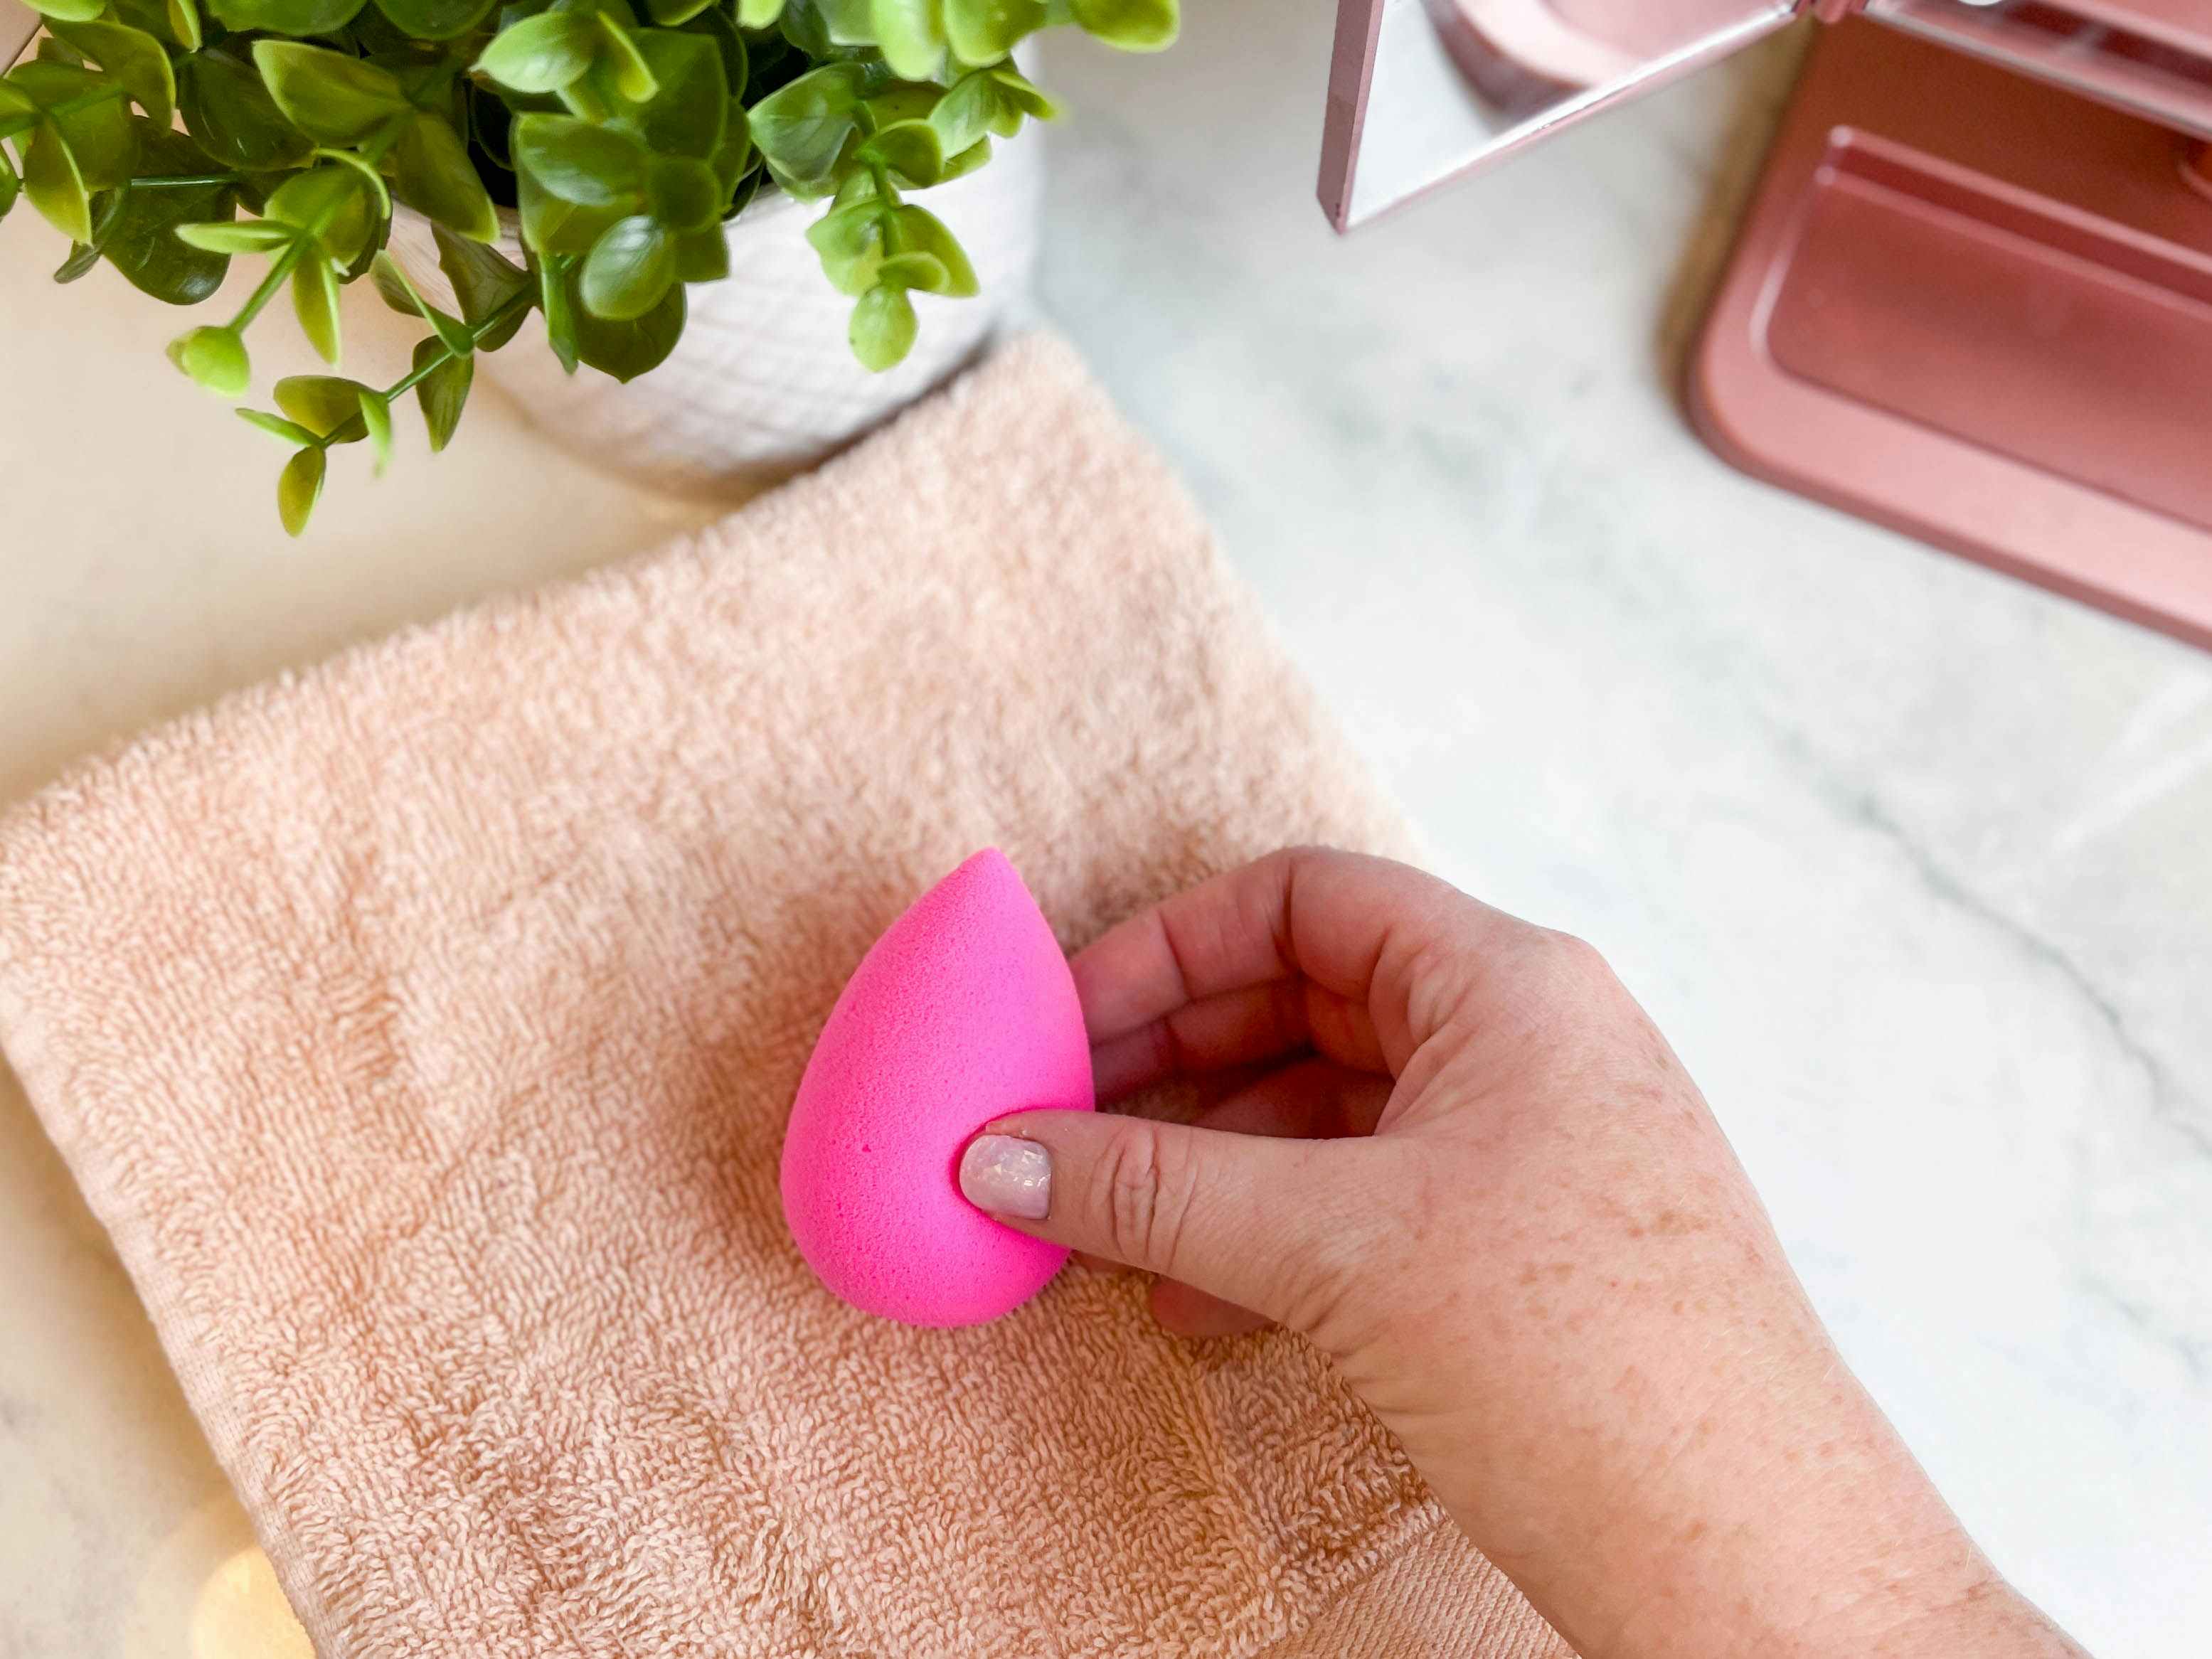 a person placing a beauty blender on a towel to dry